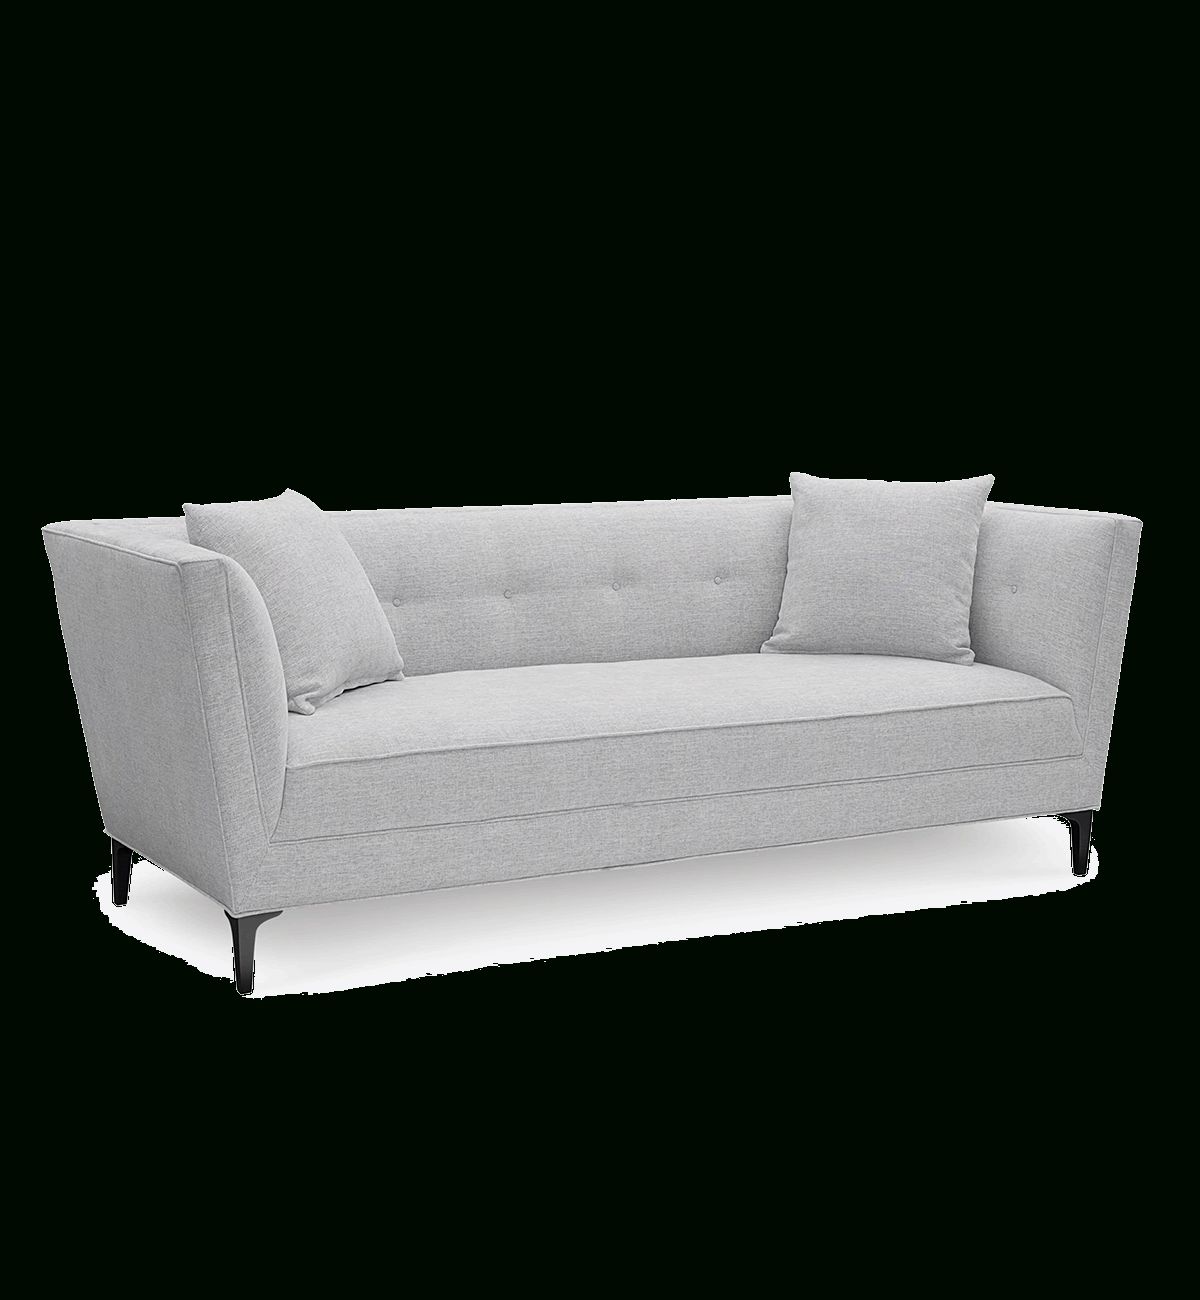 Leather Couches And Sofas – Macy's With Regard To Macys Leather Sofas (View 1 of 10)